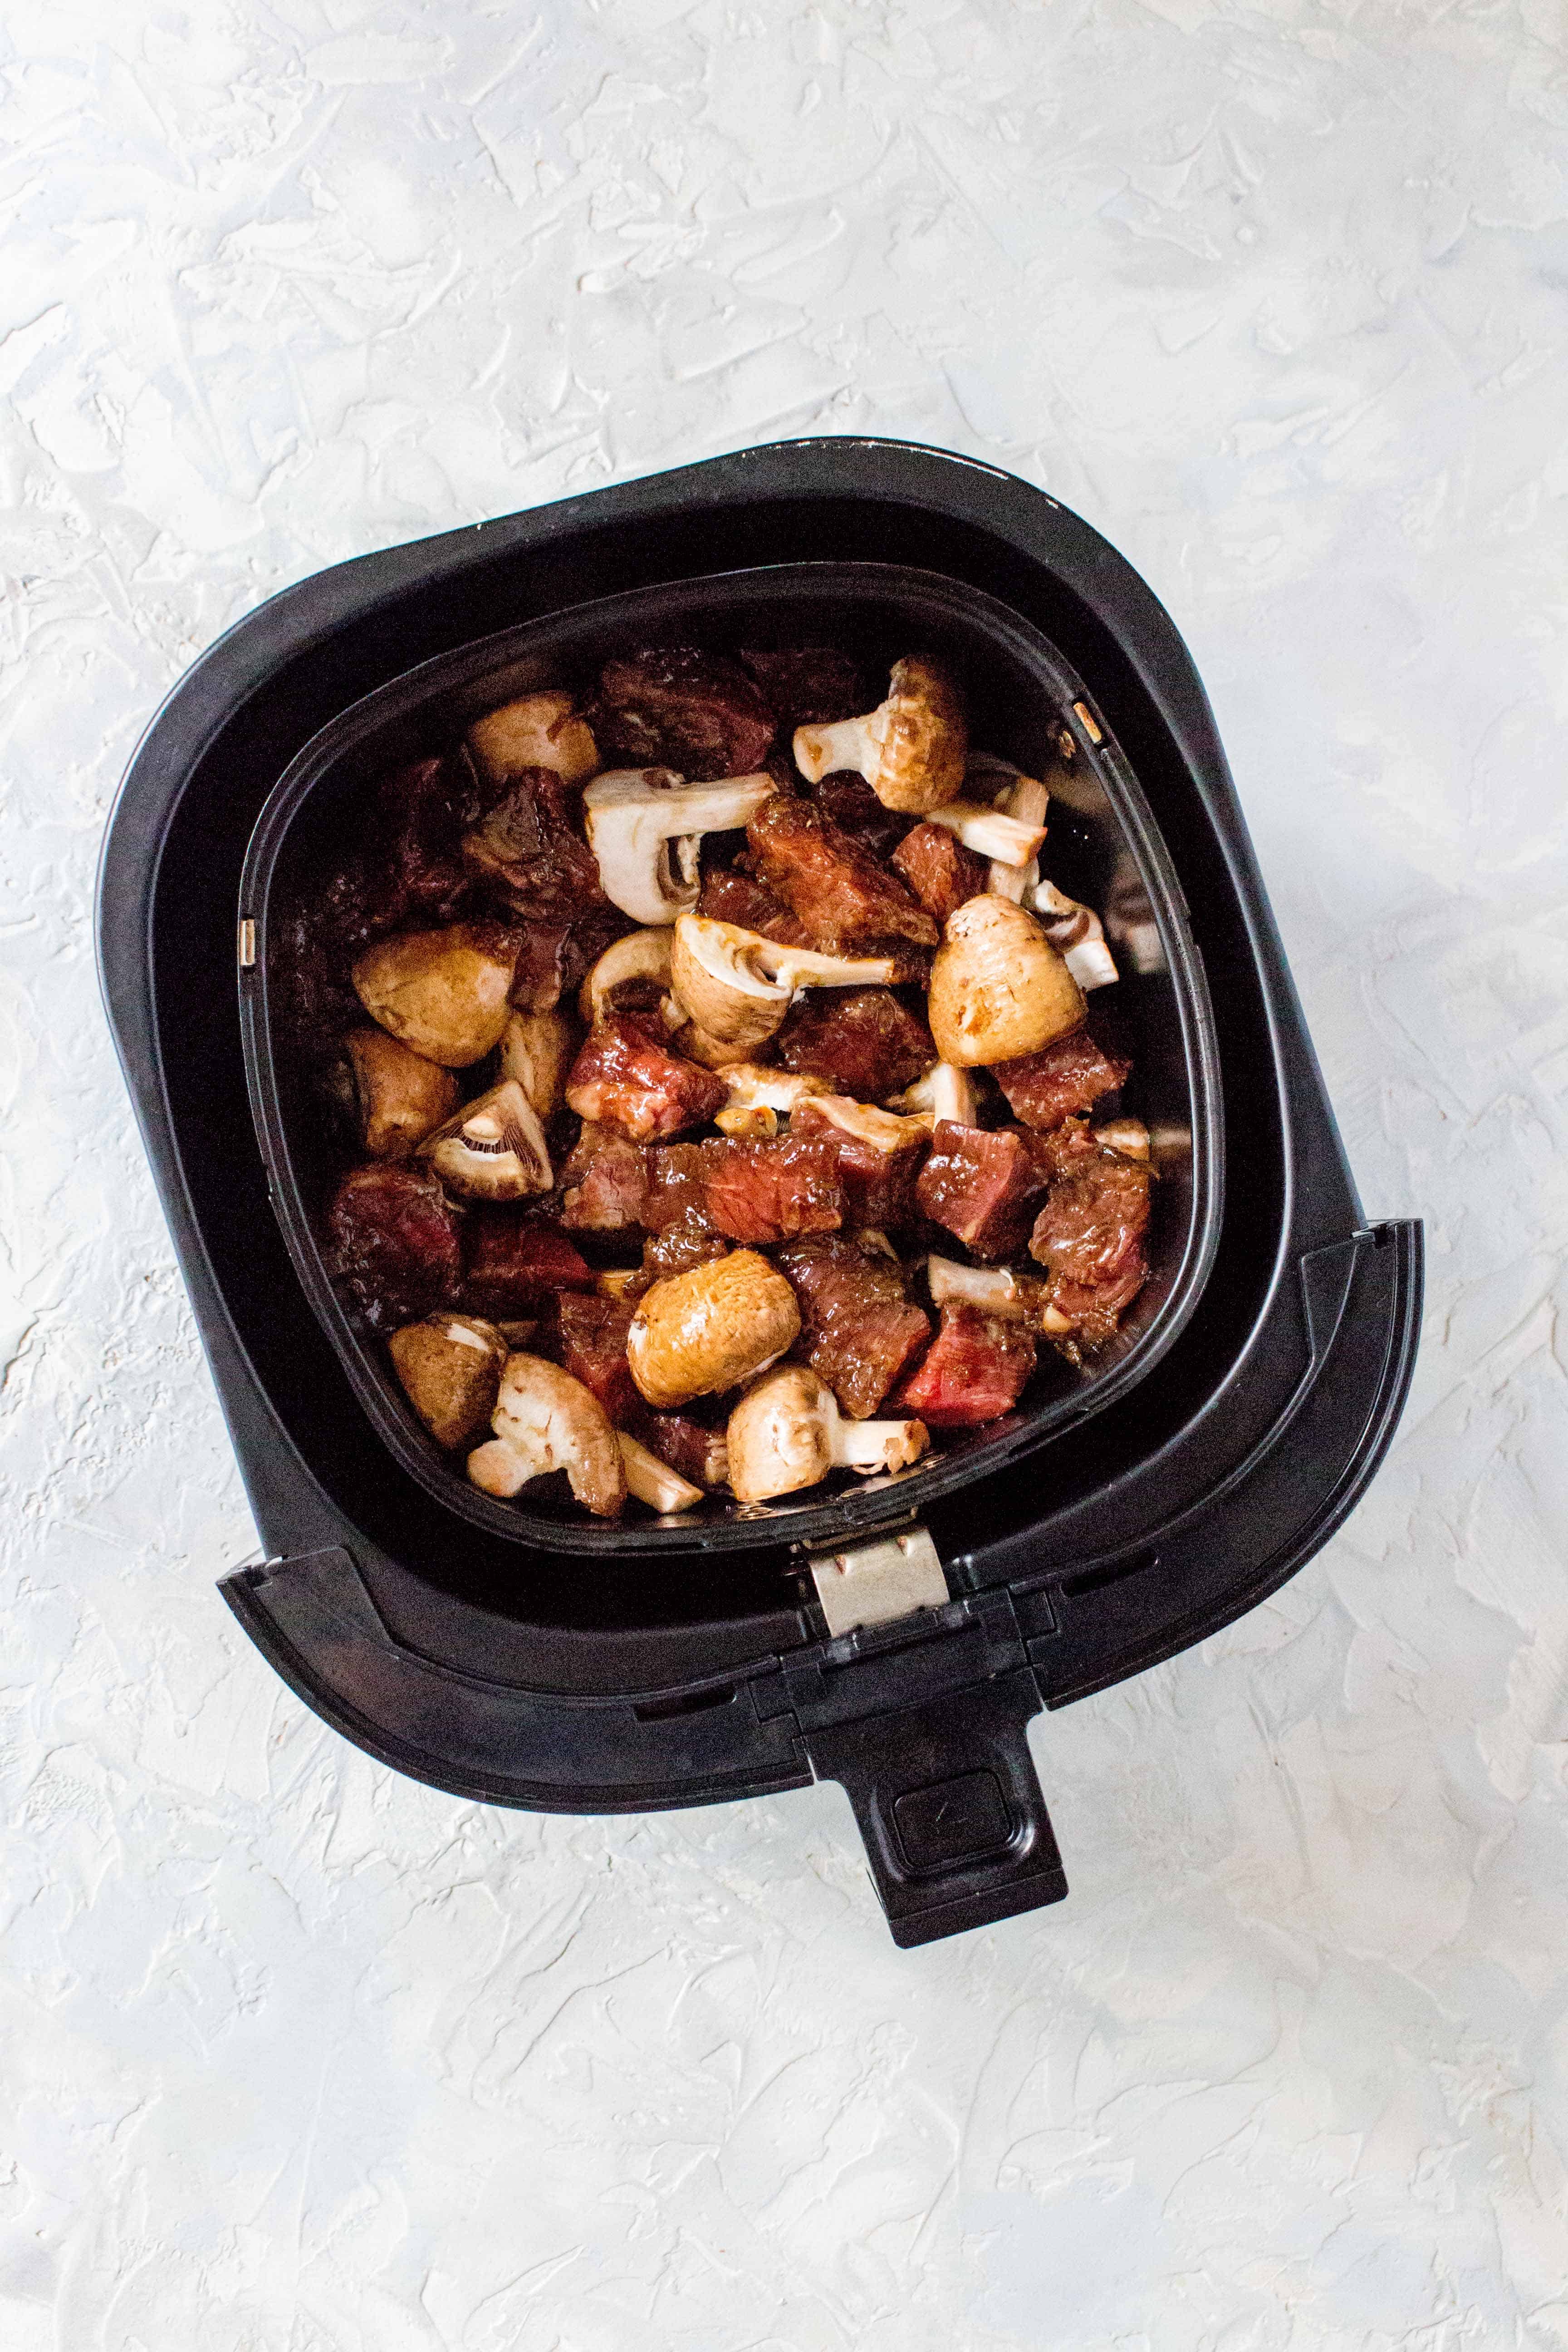 Overhead view of an air fryer basket with marinaded beef and mushrooms.